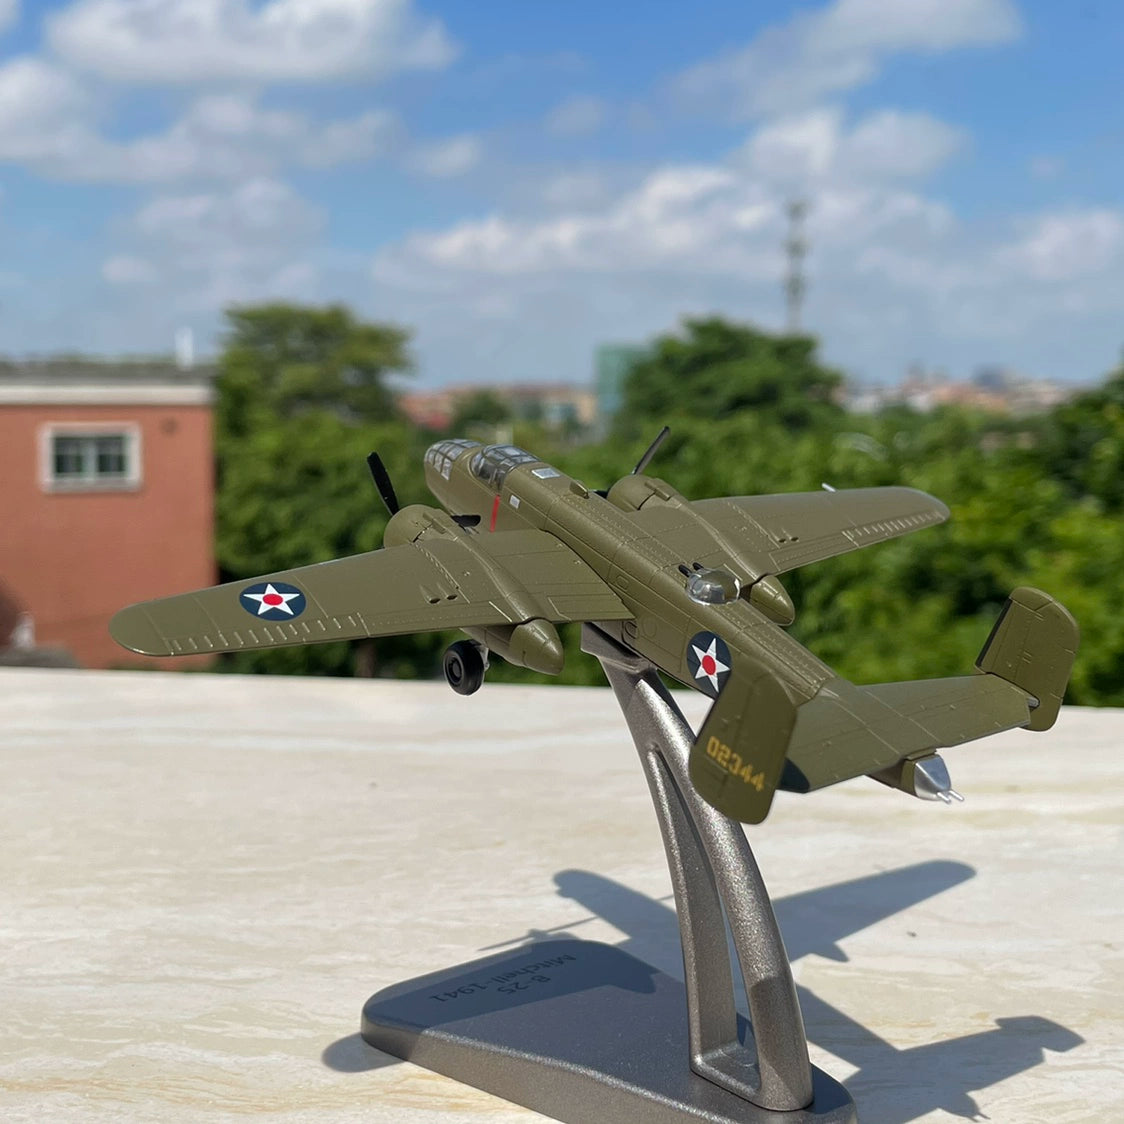 1/144 Scale North American B-25 Mitchell WWII Bomber Diecast Model Aircraft